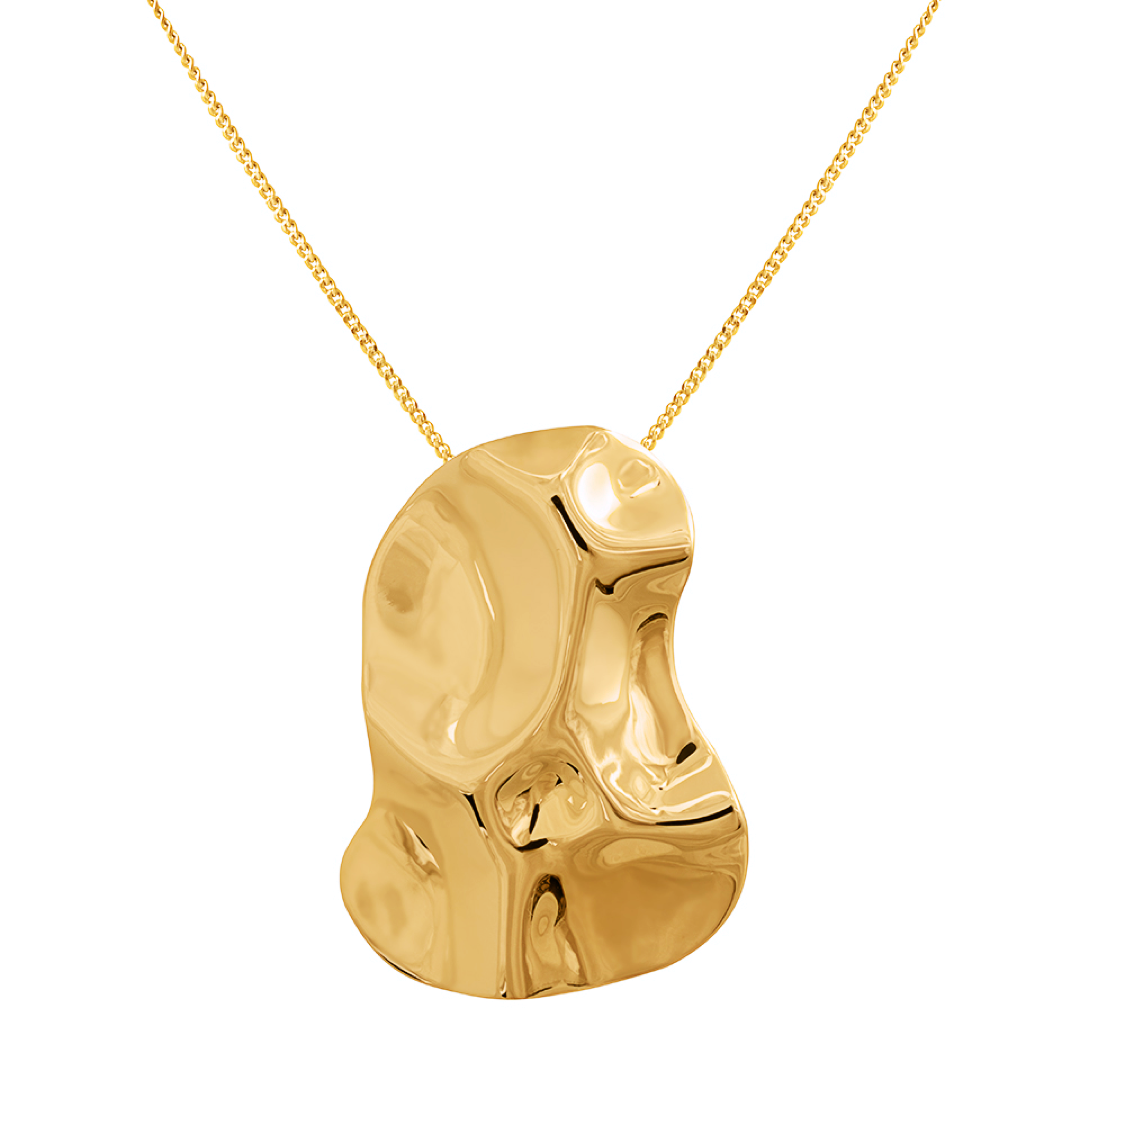 Republic Road Mirer Exquisite Necklace in Gold Available Now 